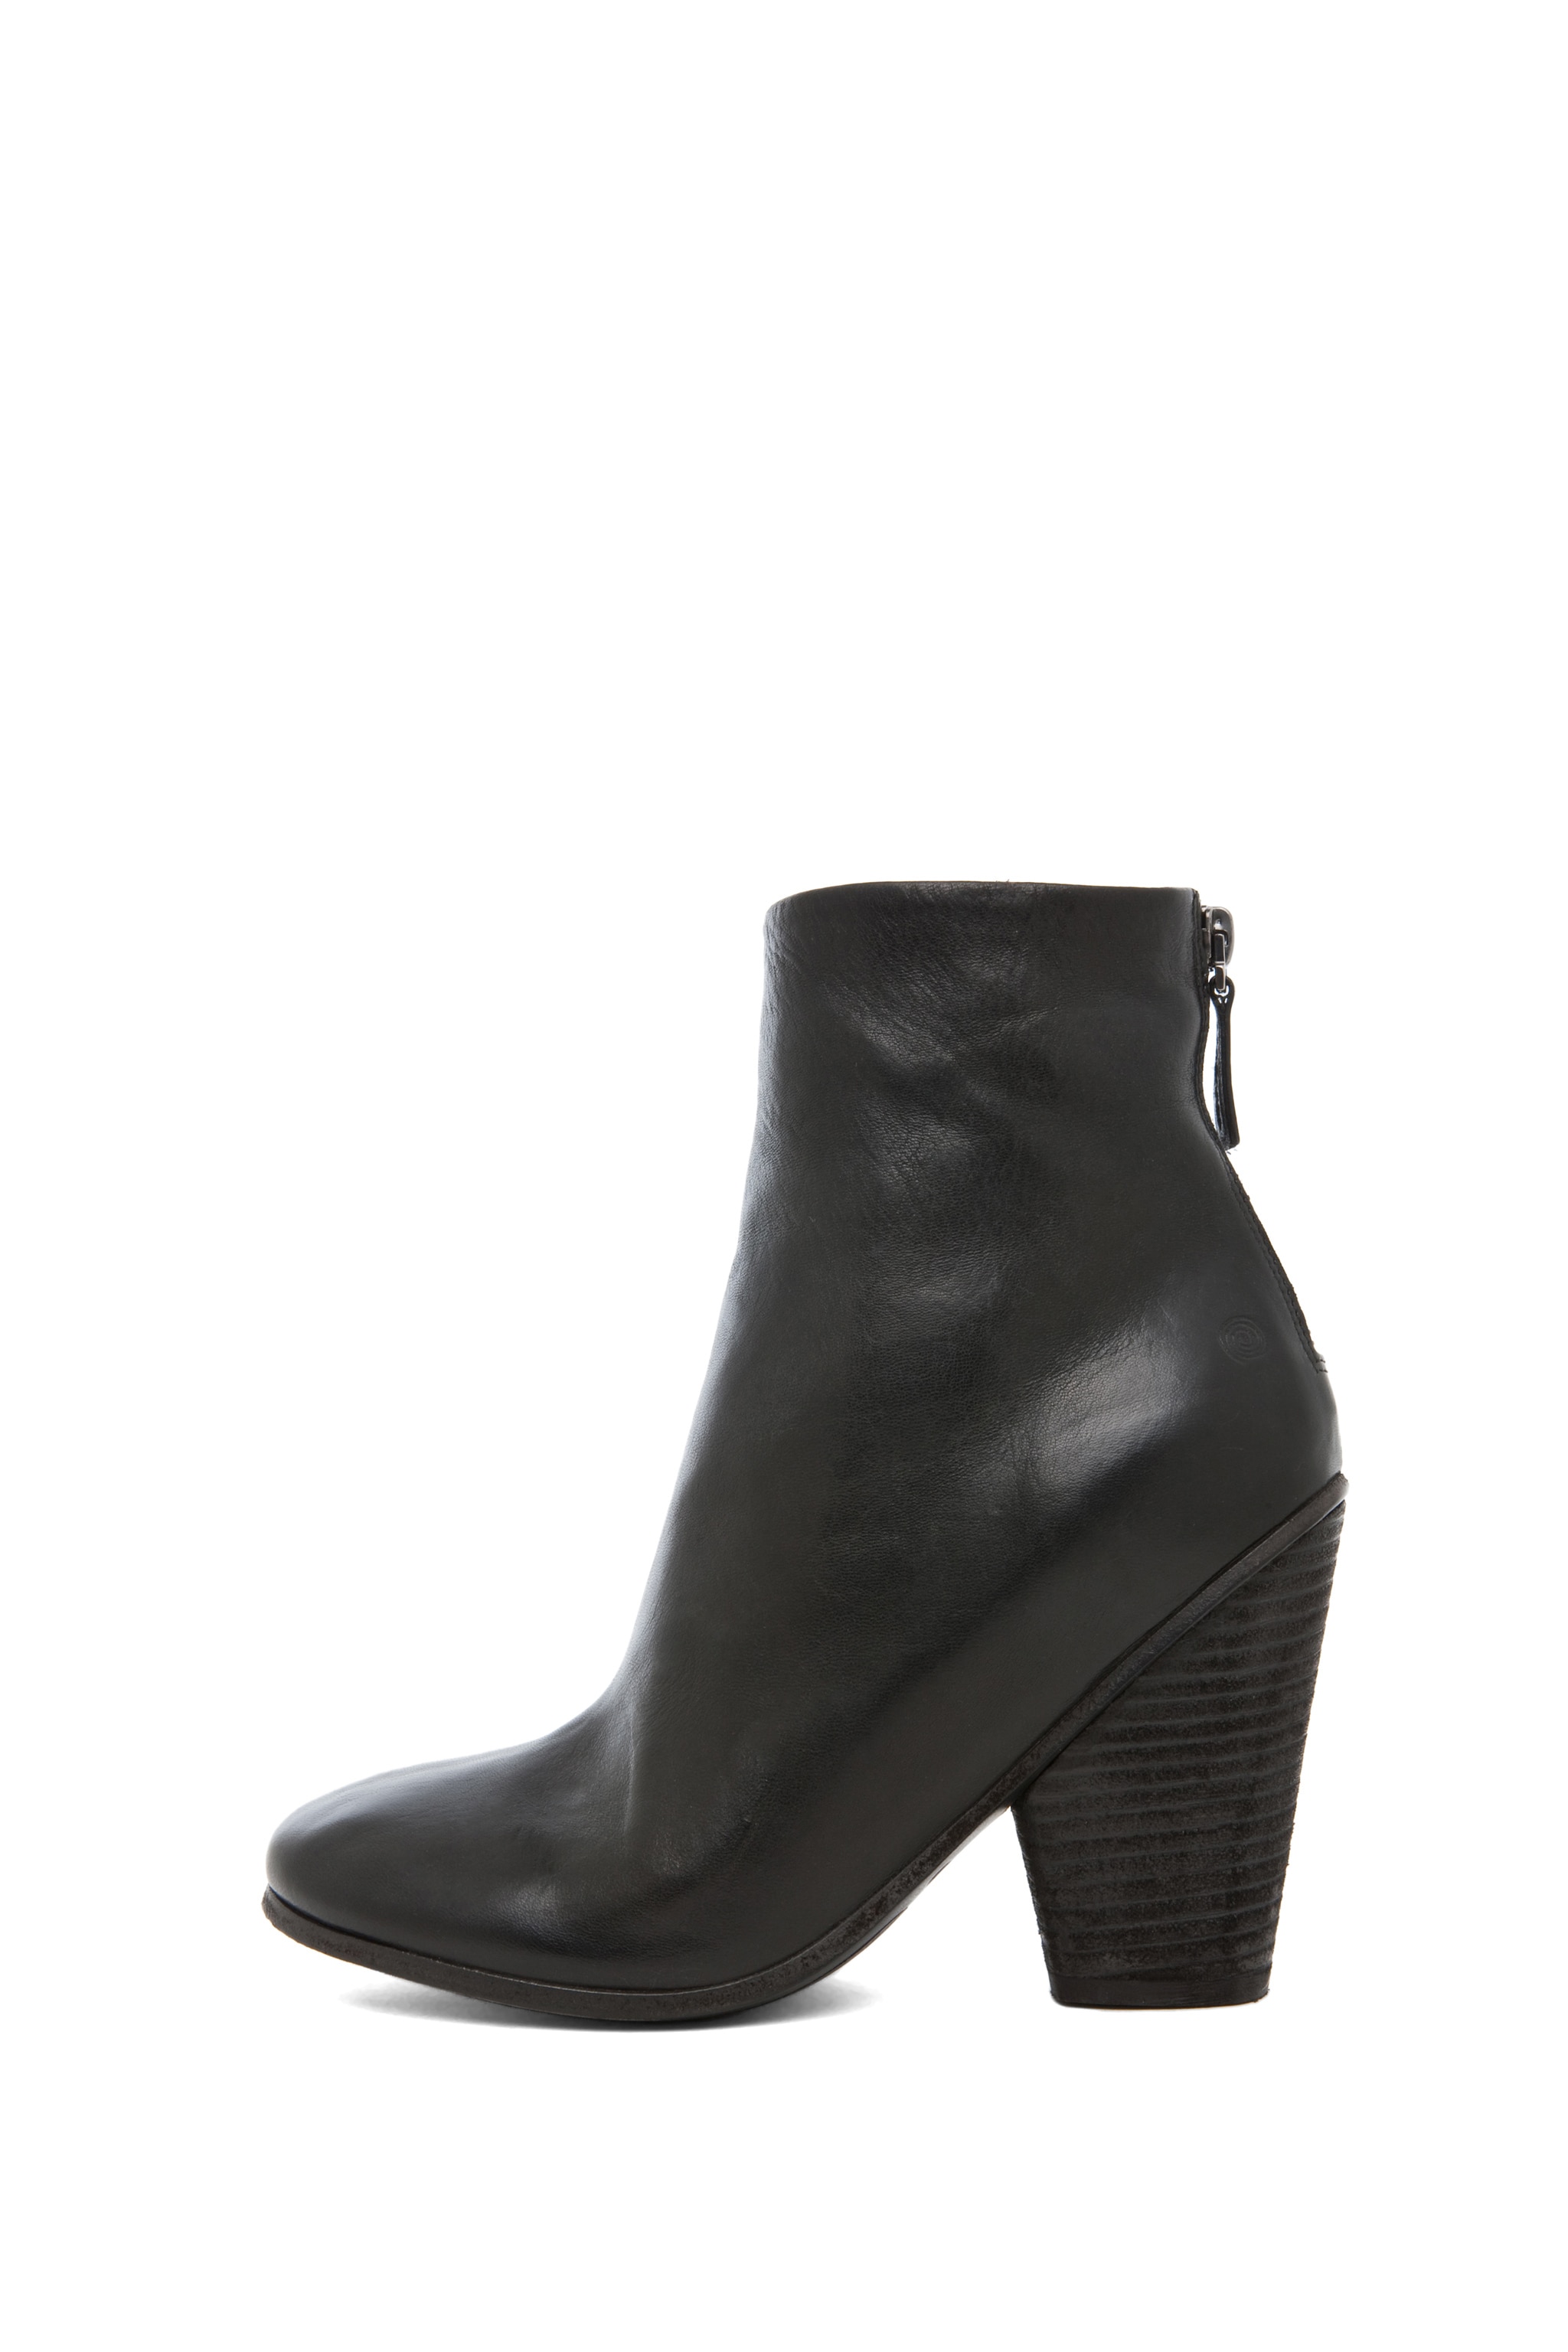 Image 1 of Marsell Nola Bootie in Black